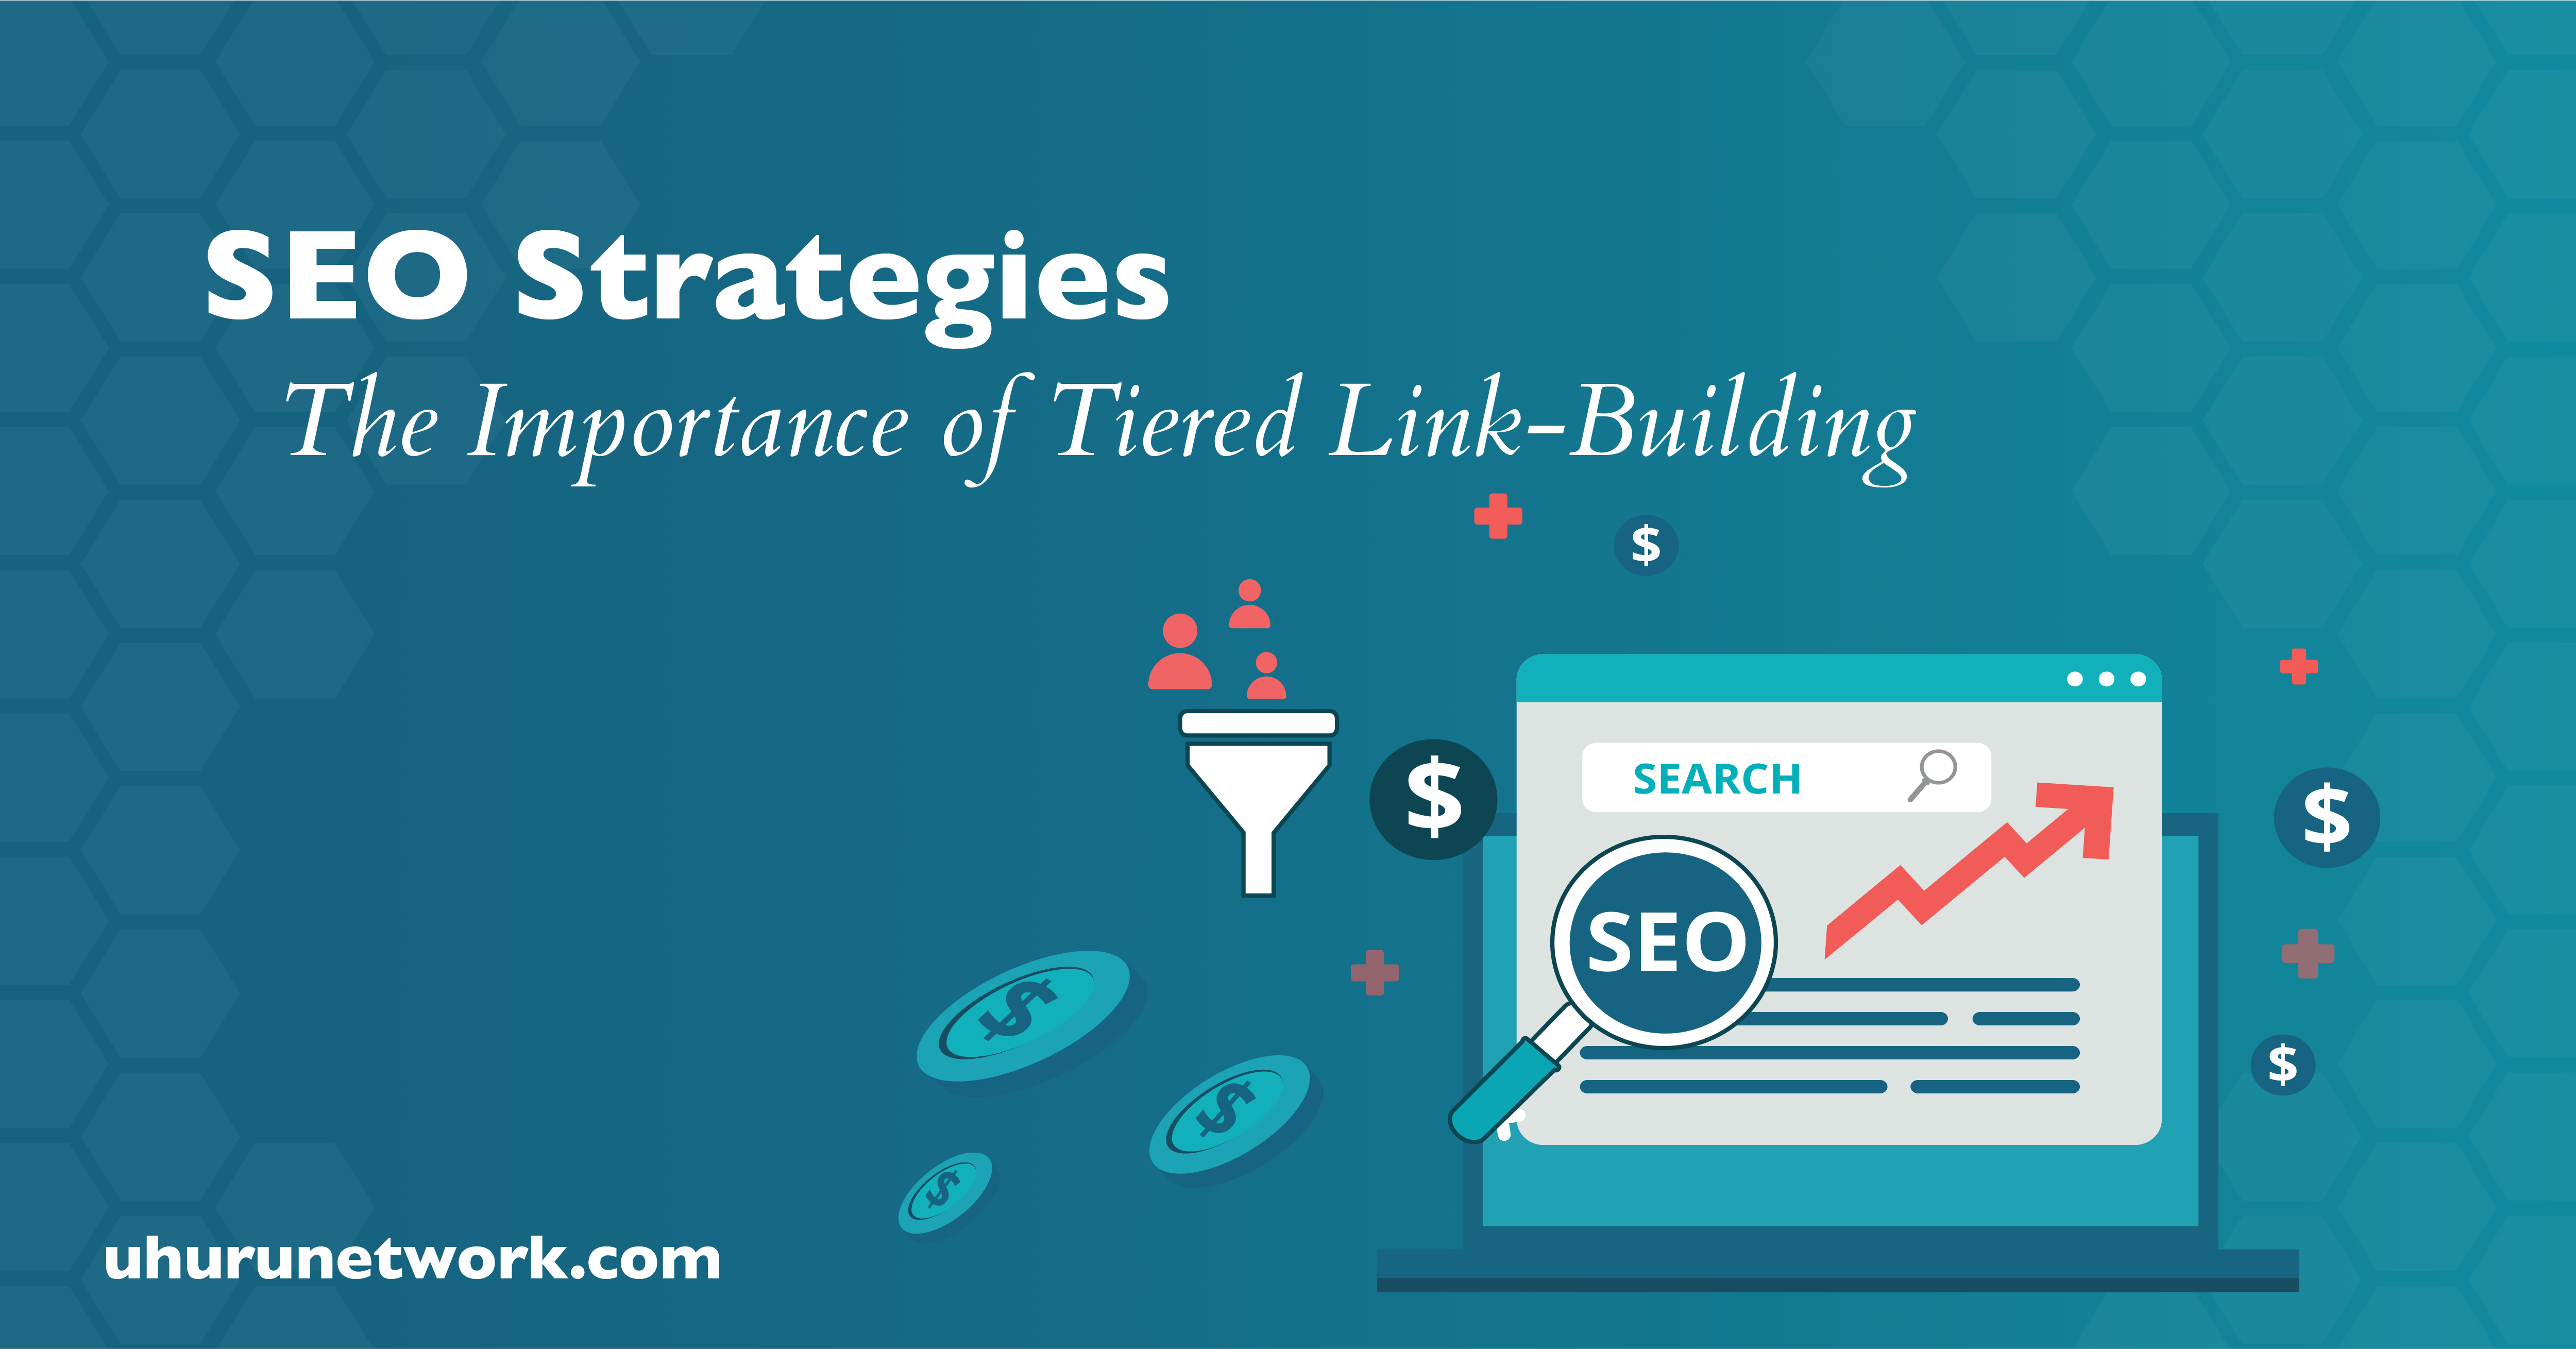 The Benefits of the Tiered Link-Building